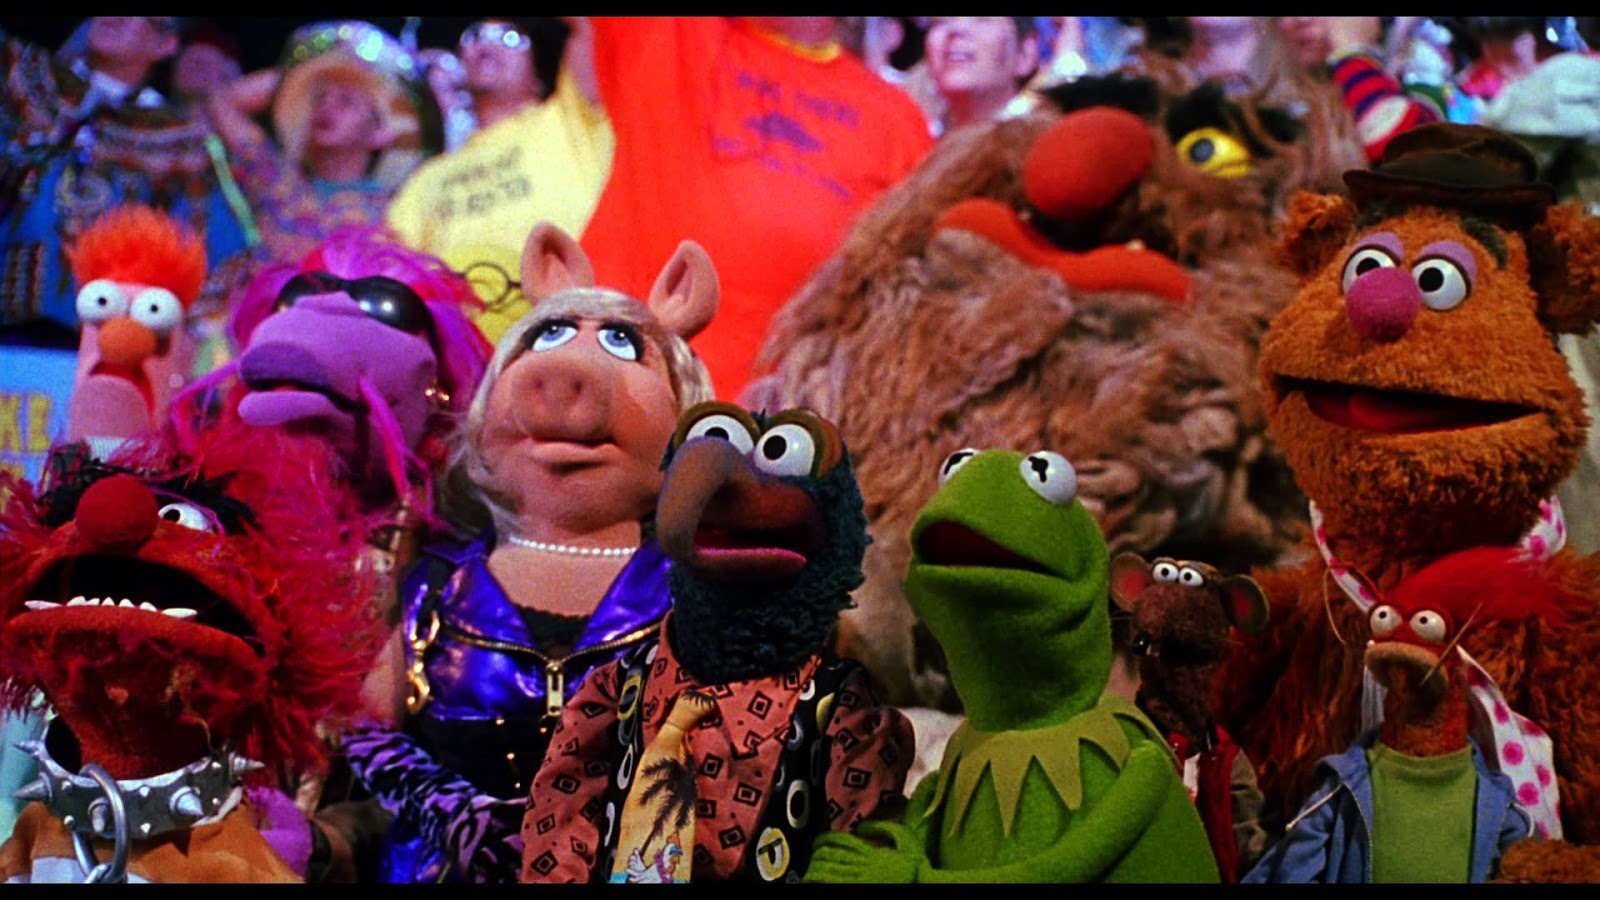 Land of The Nerds: In Laman's Terms: Ranking The Muppet Movies From Worst To Best